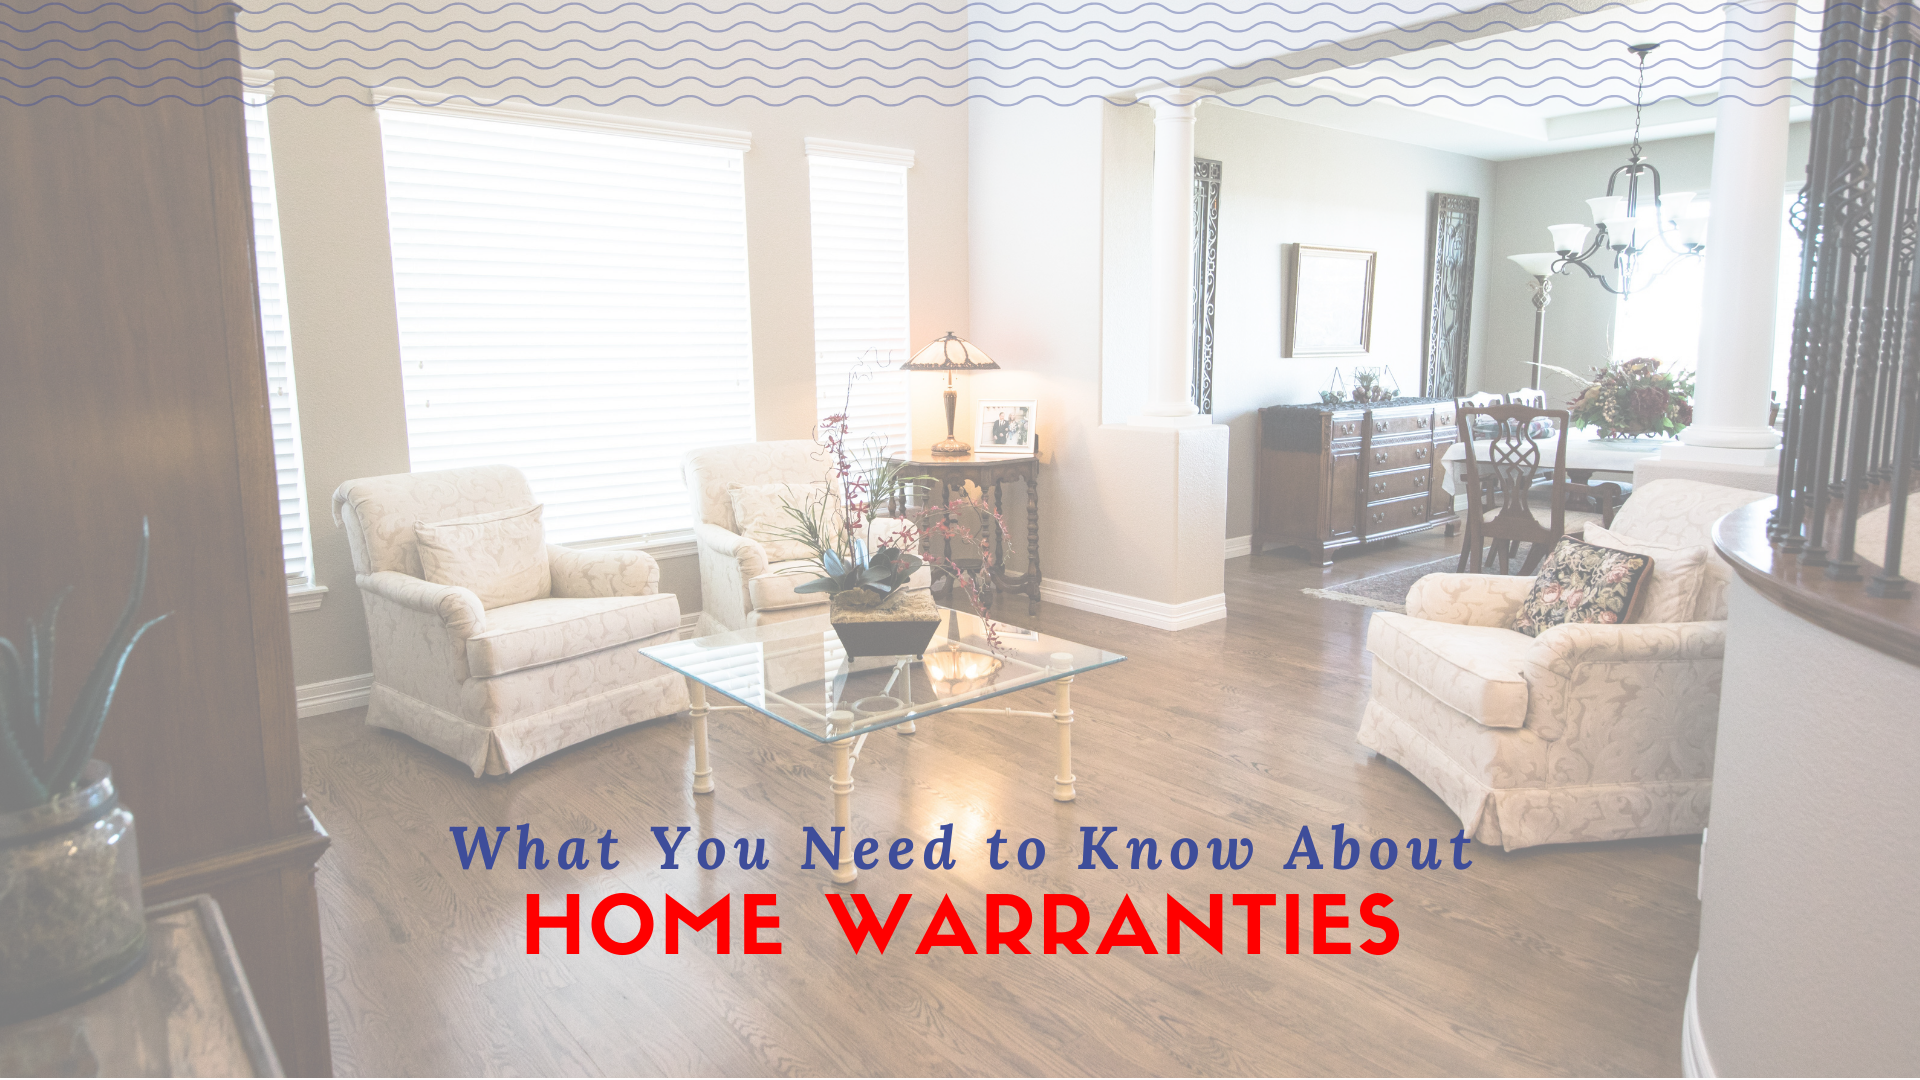 What You Need to Know About Home Warranties in Orlando, FL